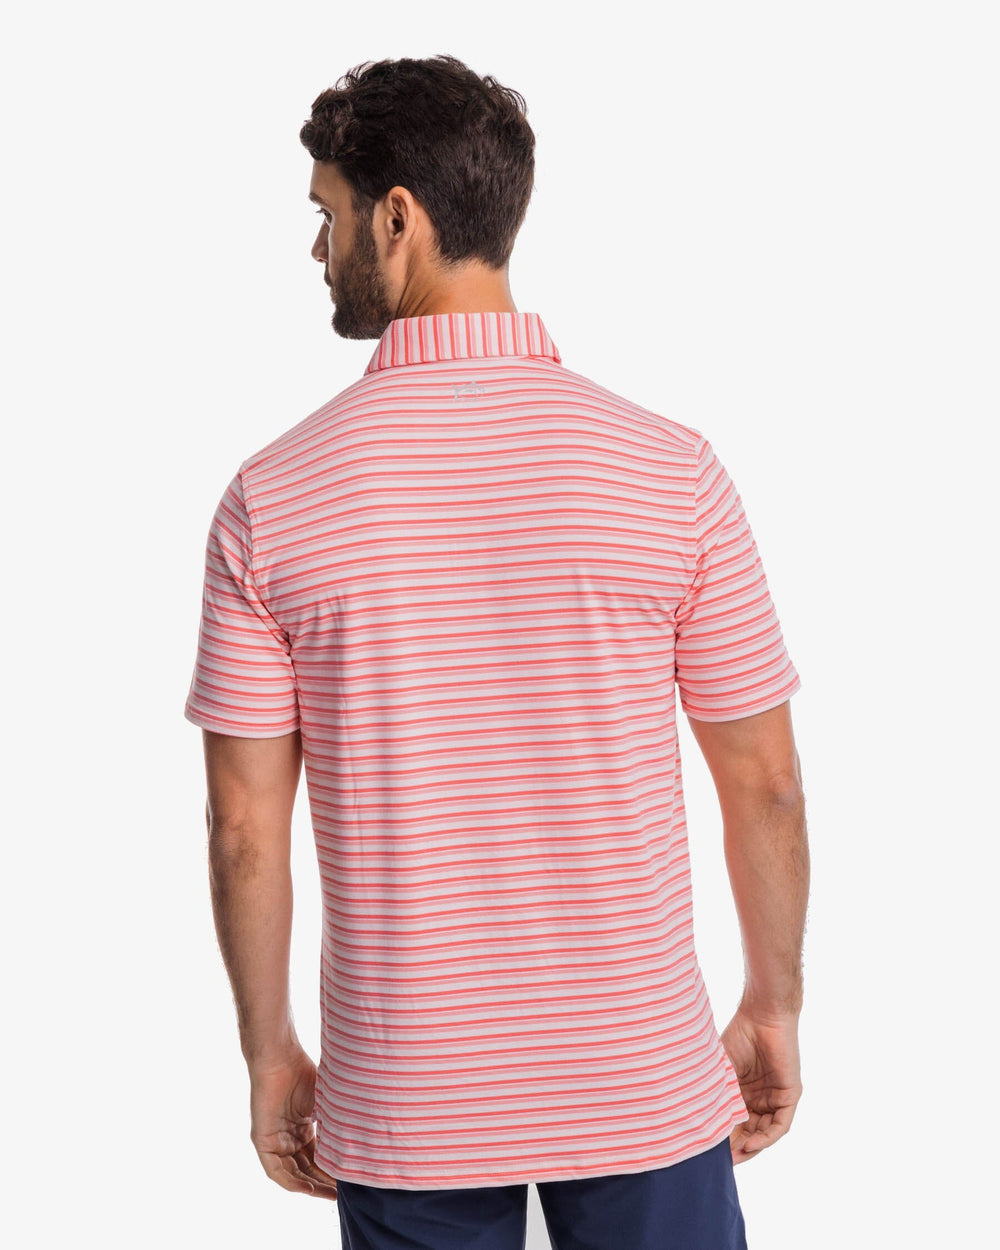 The back view of the Southern Tide Ryder Heather Kendrick Performance Polo Shirt by Southern Tide - Heather Rose Blush